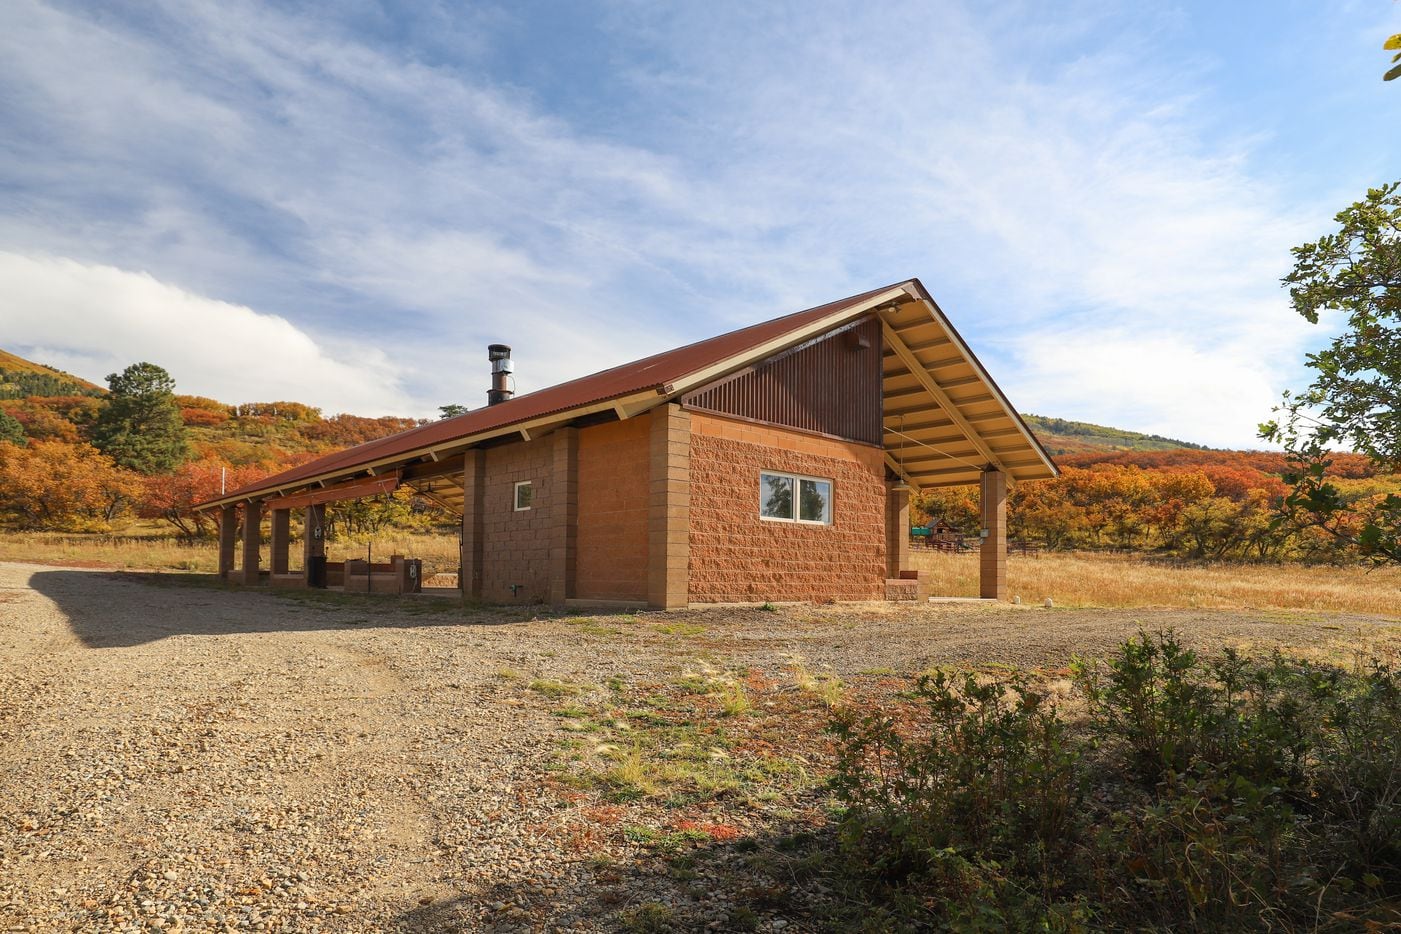 Take a look at the Wildflower Ranch at 3456 County Road 124 in Hesperus, CO.